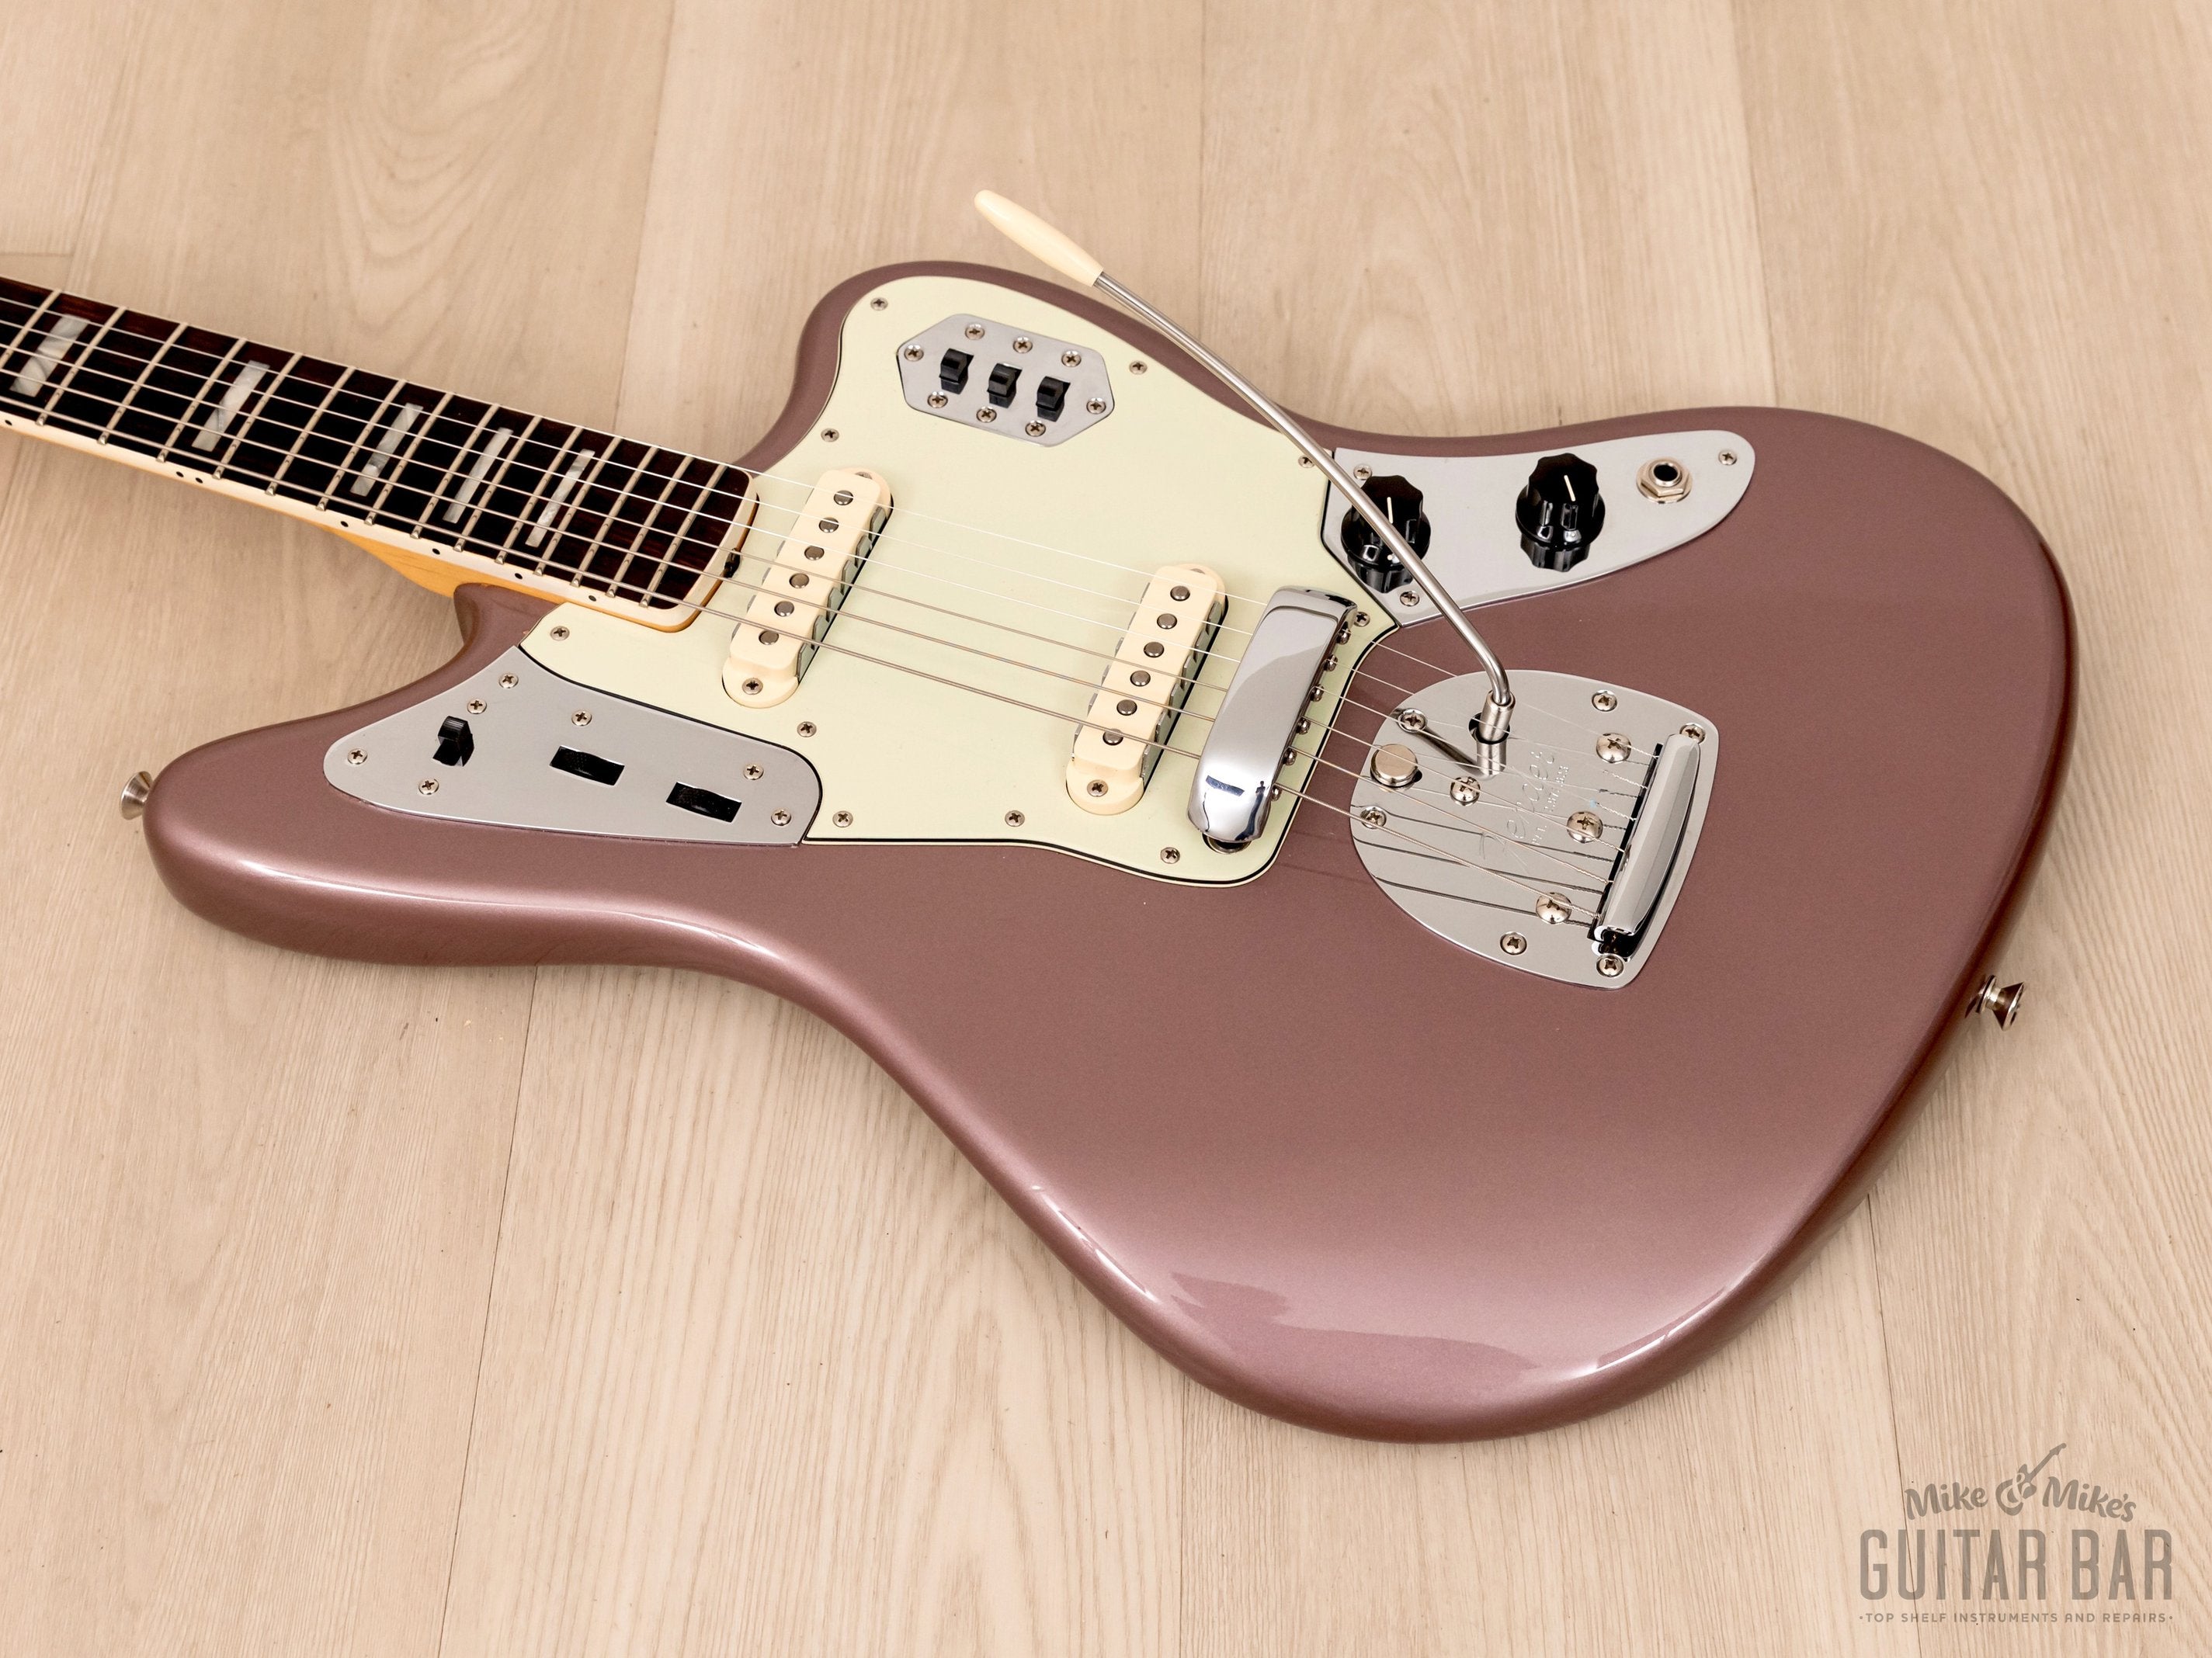 2012 Fender 50th Anniversary Jaguar Offset Guitar Burgundy Mist Lacquer, USA-Made w/ Case & Tags, 1 of 50